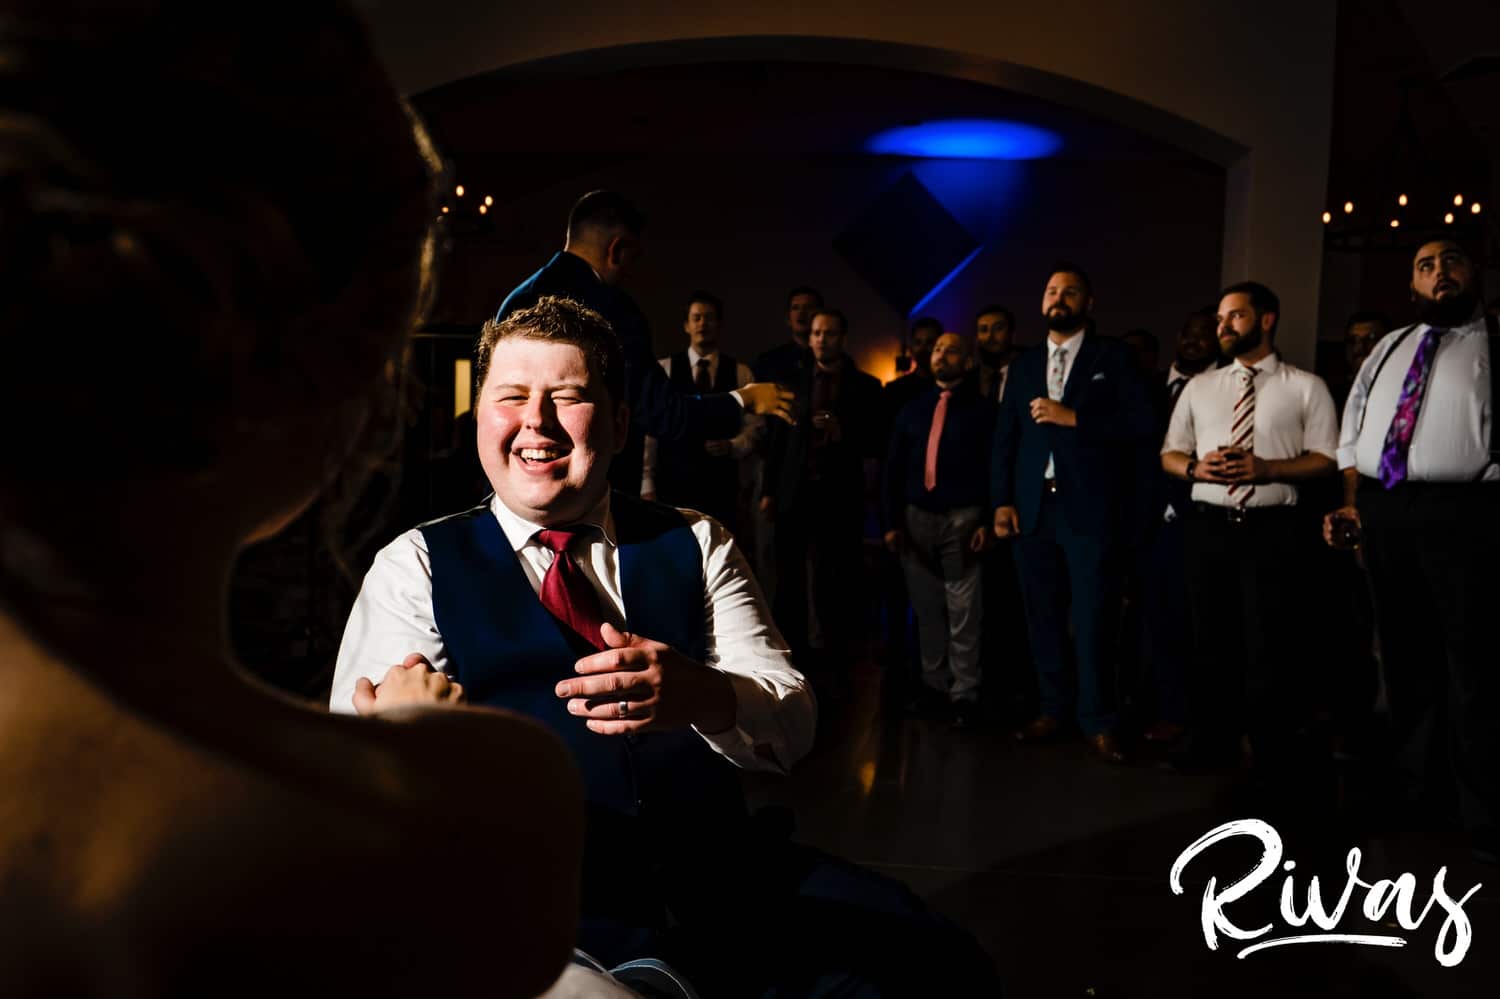 A candid picture taken over the shoulder of a bride of her groom, down on one knee, serenading her during their fall wedding reception. 